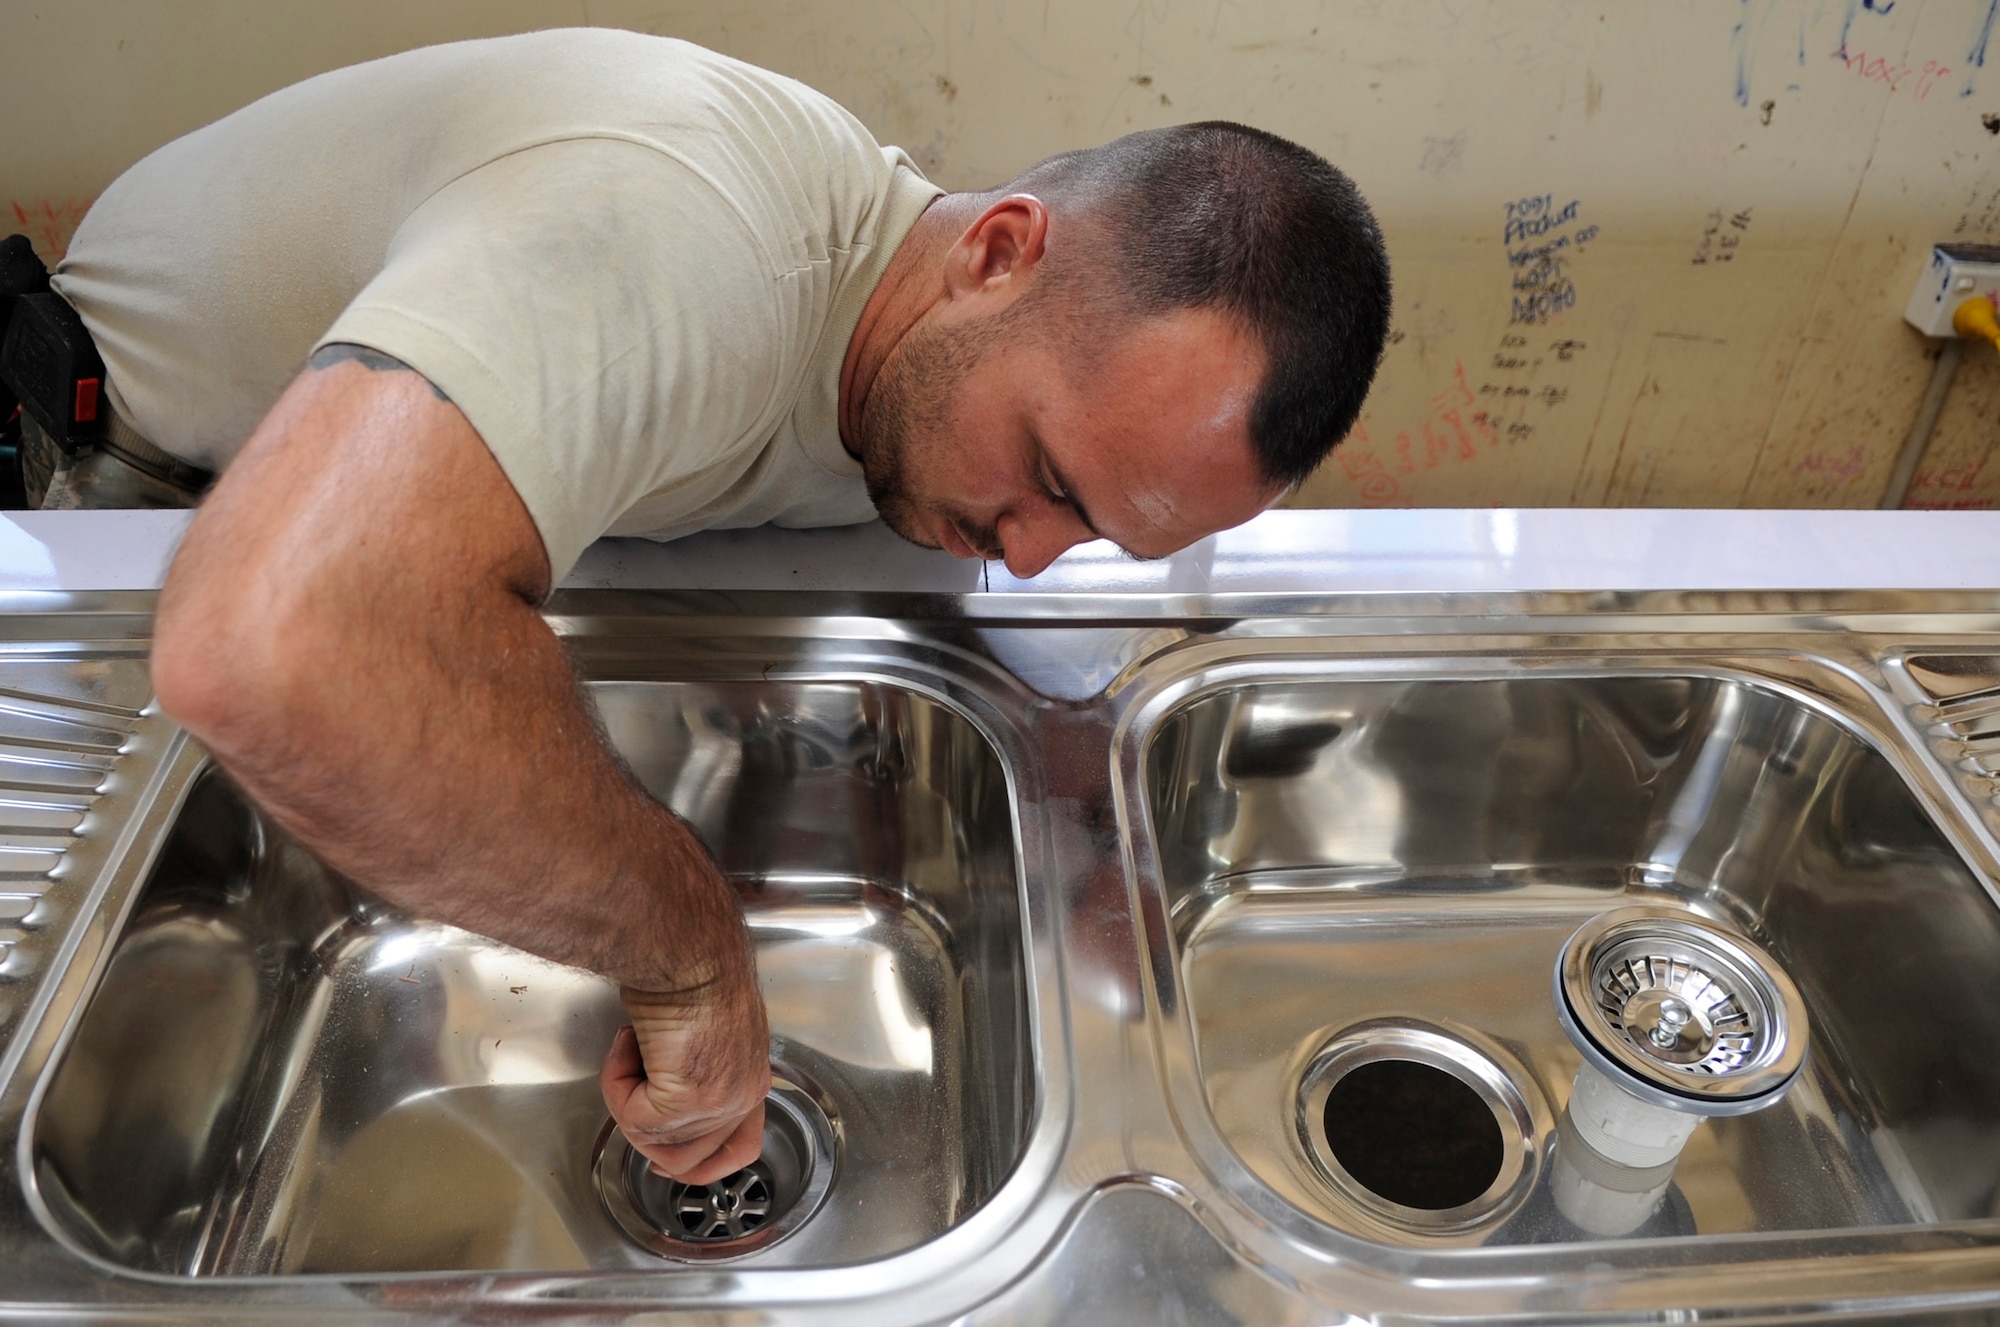 U.S. Air Force Senior Airman Stephen Pond, 647th Civil Engineer Squadron plumber, Joint Base Pearl Harbor-Hickam, Hawaii, installs a sinks for a science lab at Gahuku Primary School in the Eastern Highlands Providence, Papua New Guinea, June 2, 2015. The mission of Pacific Angel is to upgrade education and health facilities, as well as work to deepen local disaster response capabilities. (U.S. Air Force photo by Staff Sgt. Marcus Morris/Released)